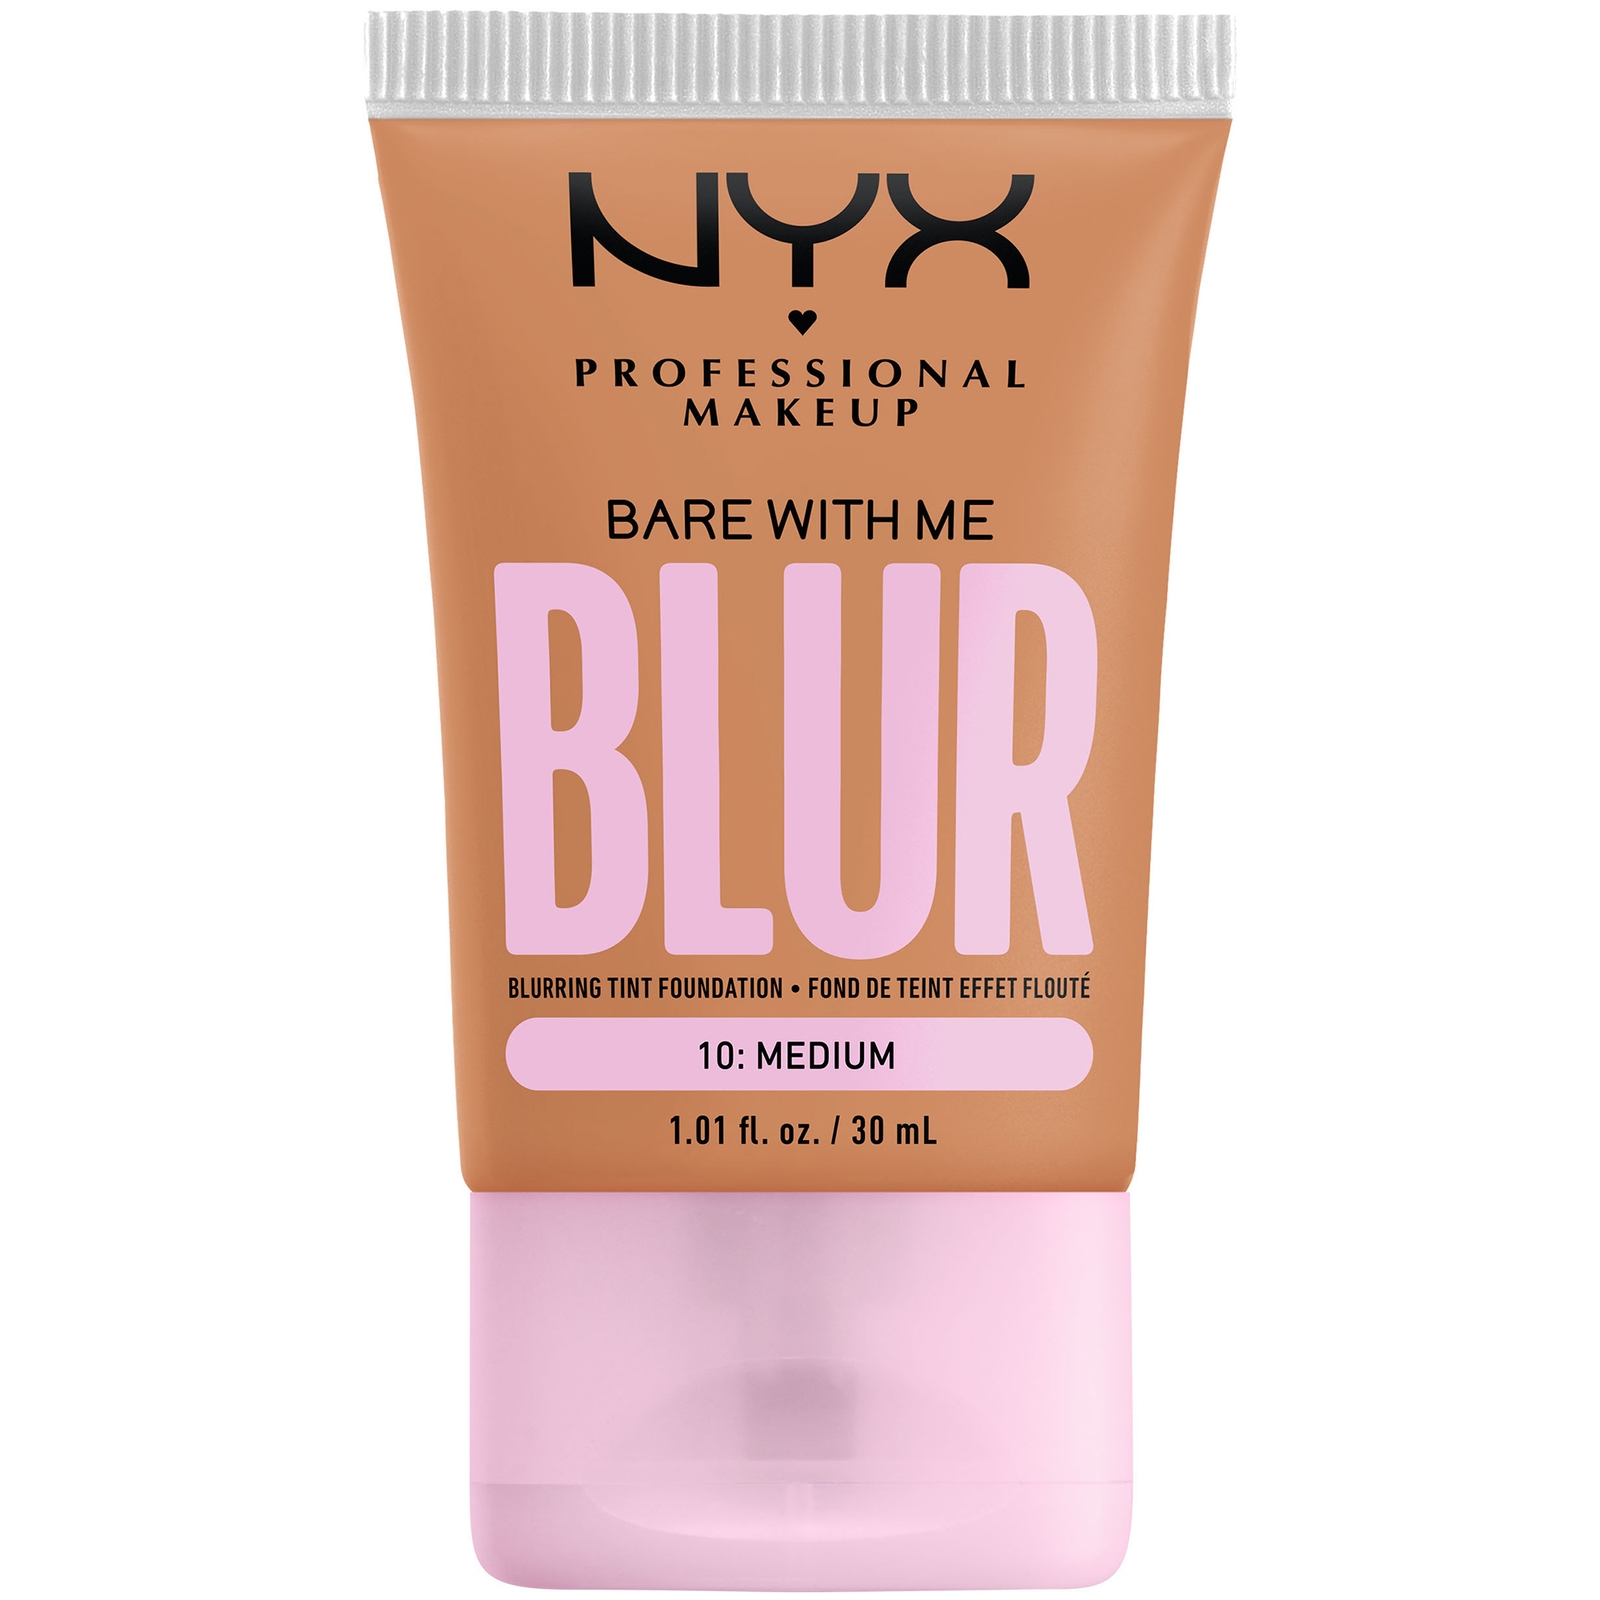 Nyx Professional Makeup Bare With Me Blur Tint Foundation 30ml (varios Shades) - Medium In White